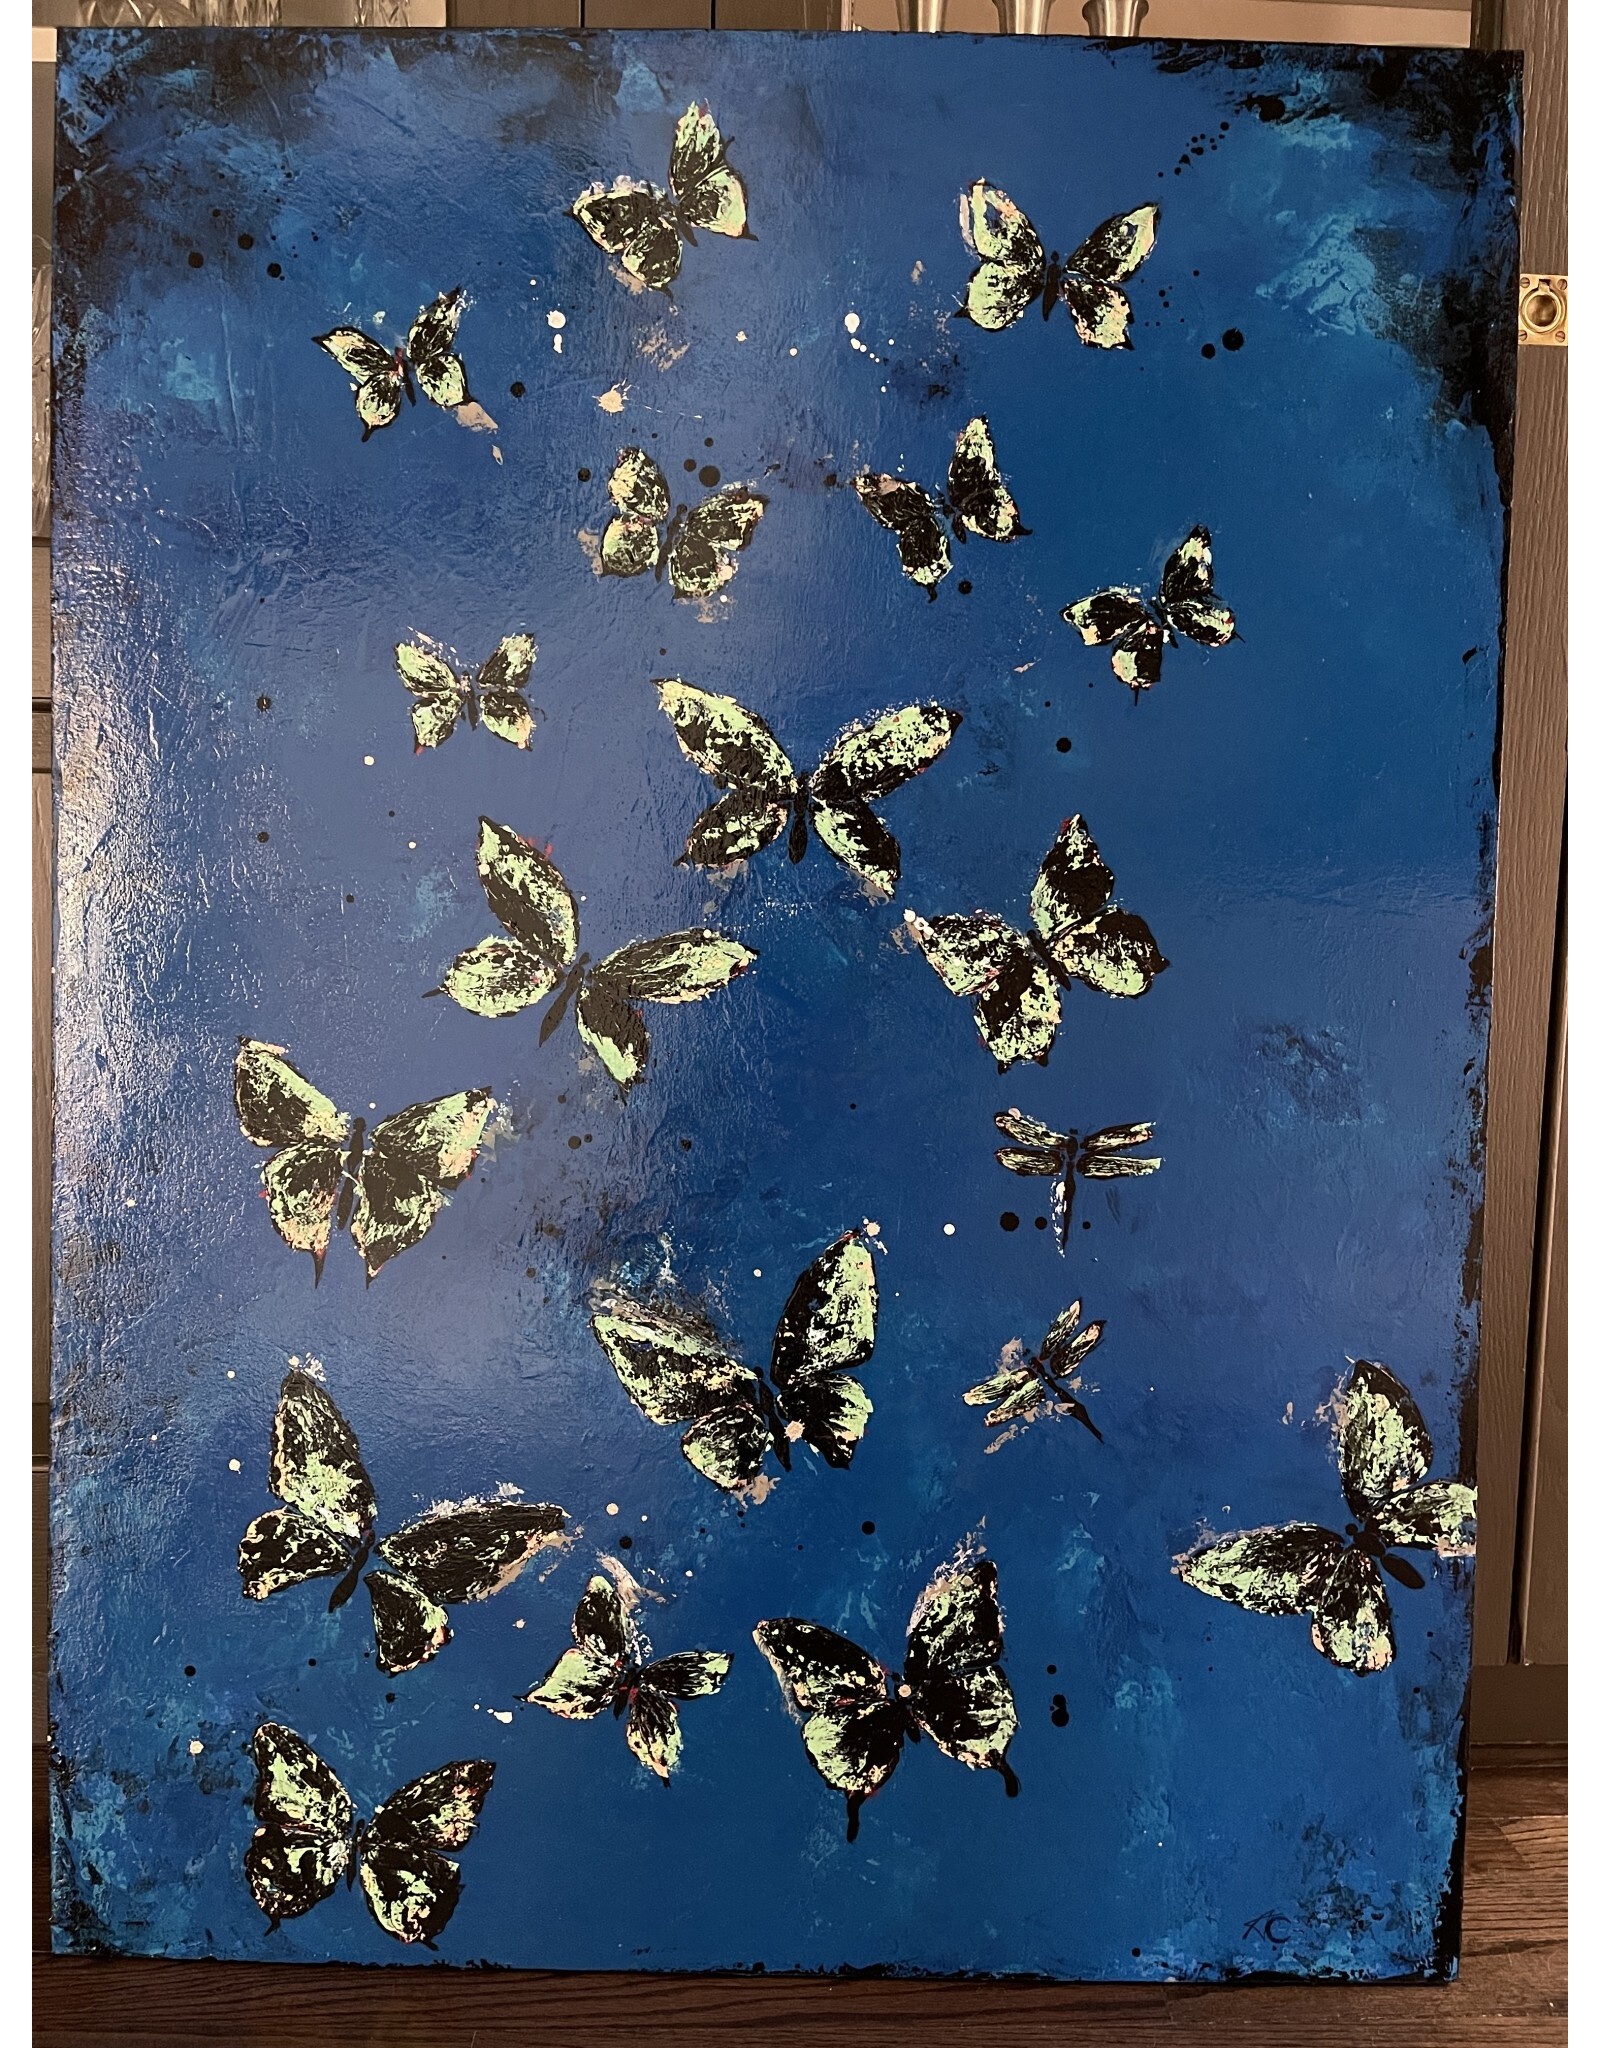 Annette Colby - Painter 'Search For What Is True' - Butterfly Painting - AC